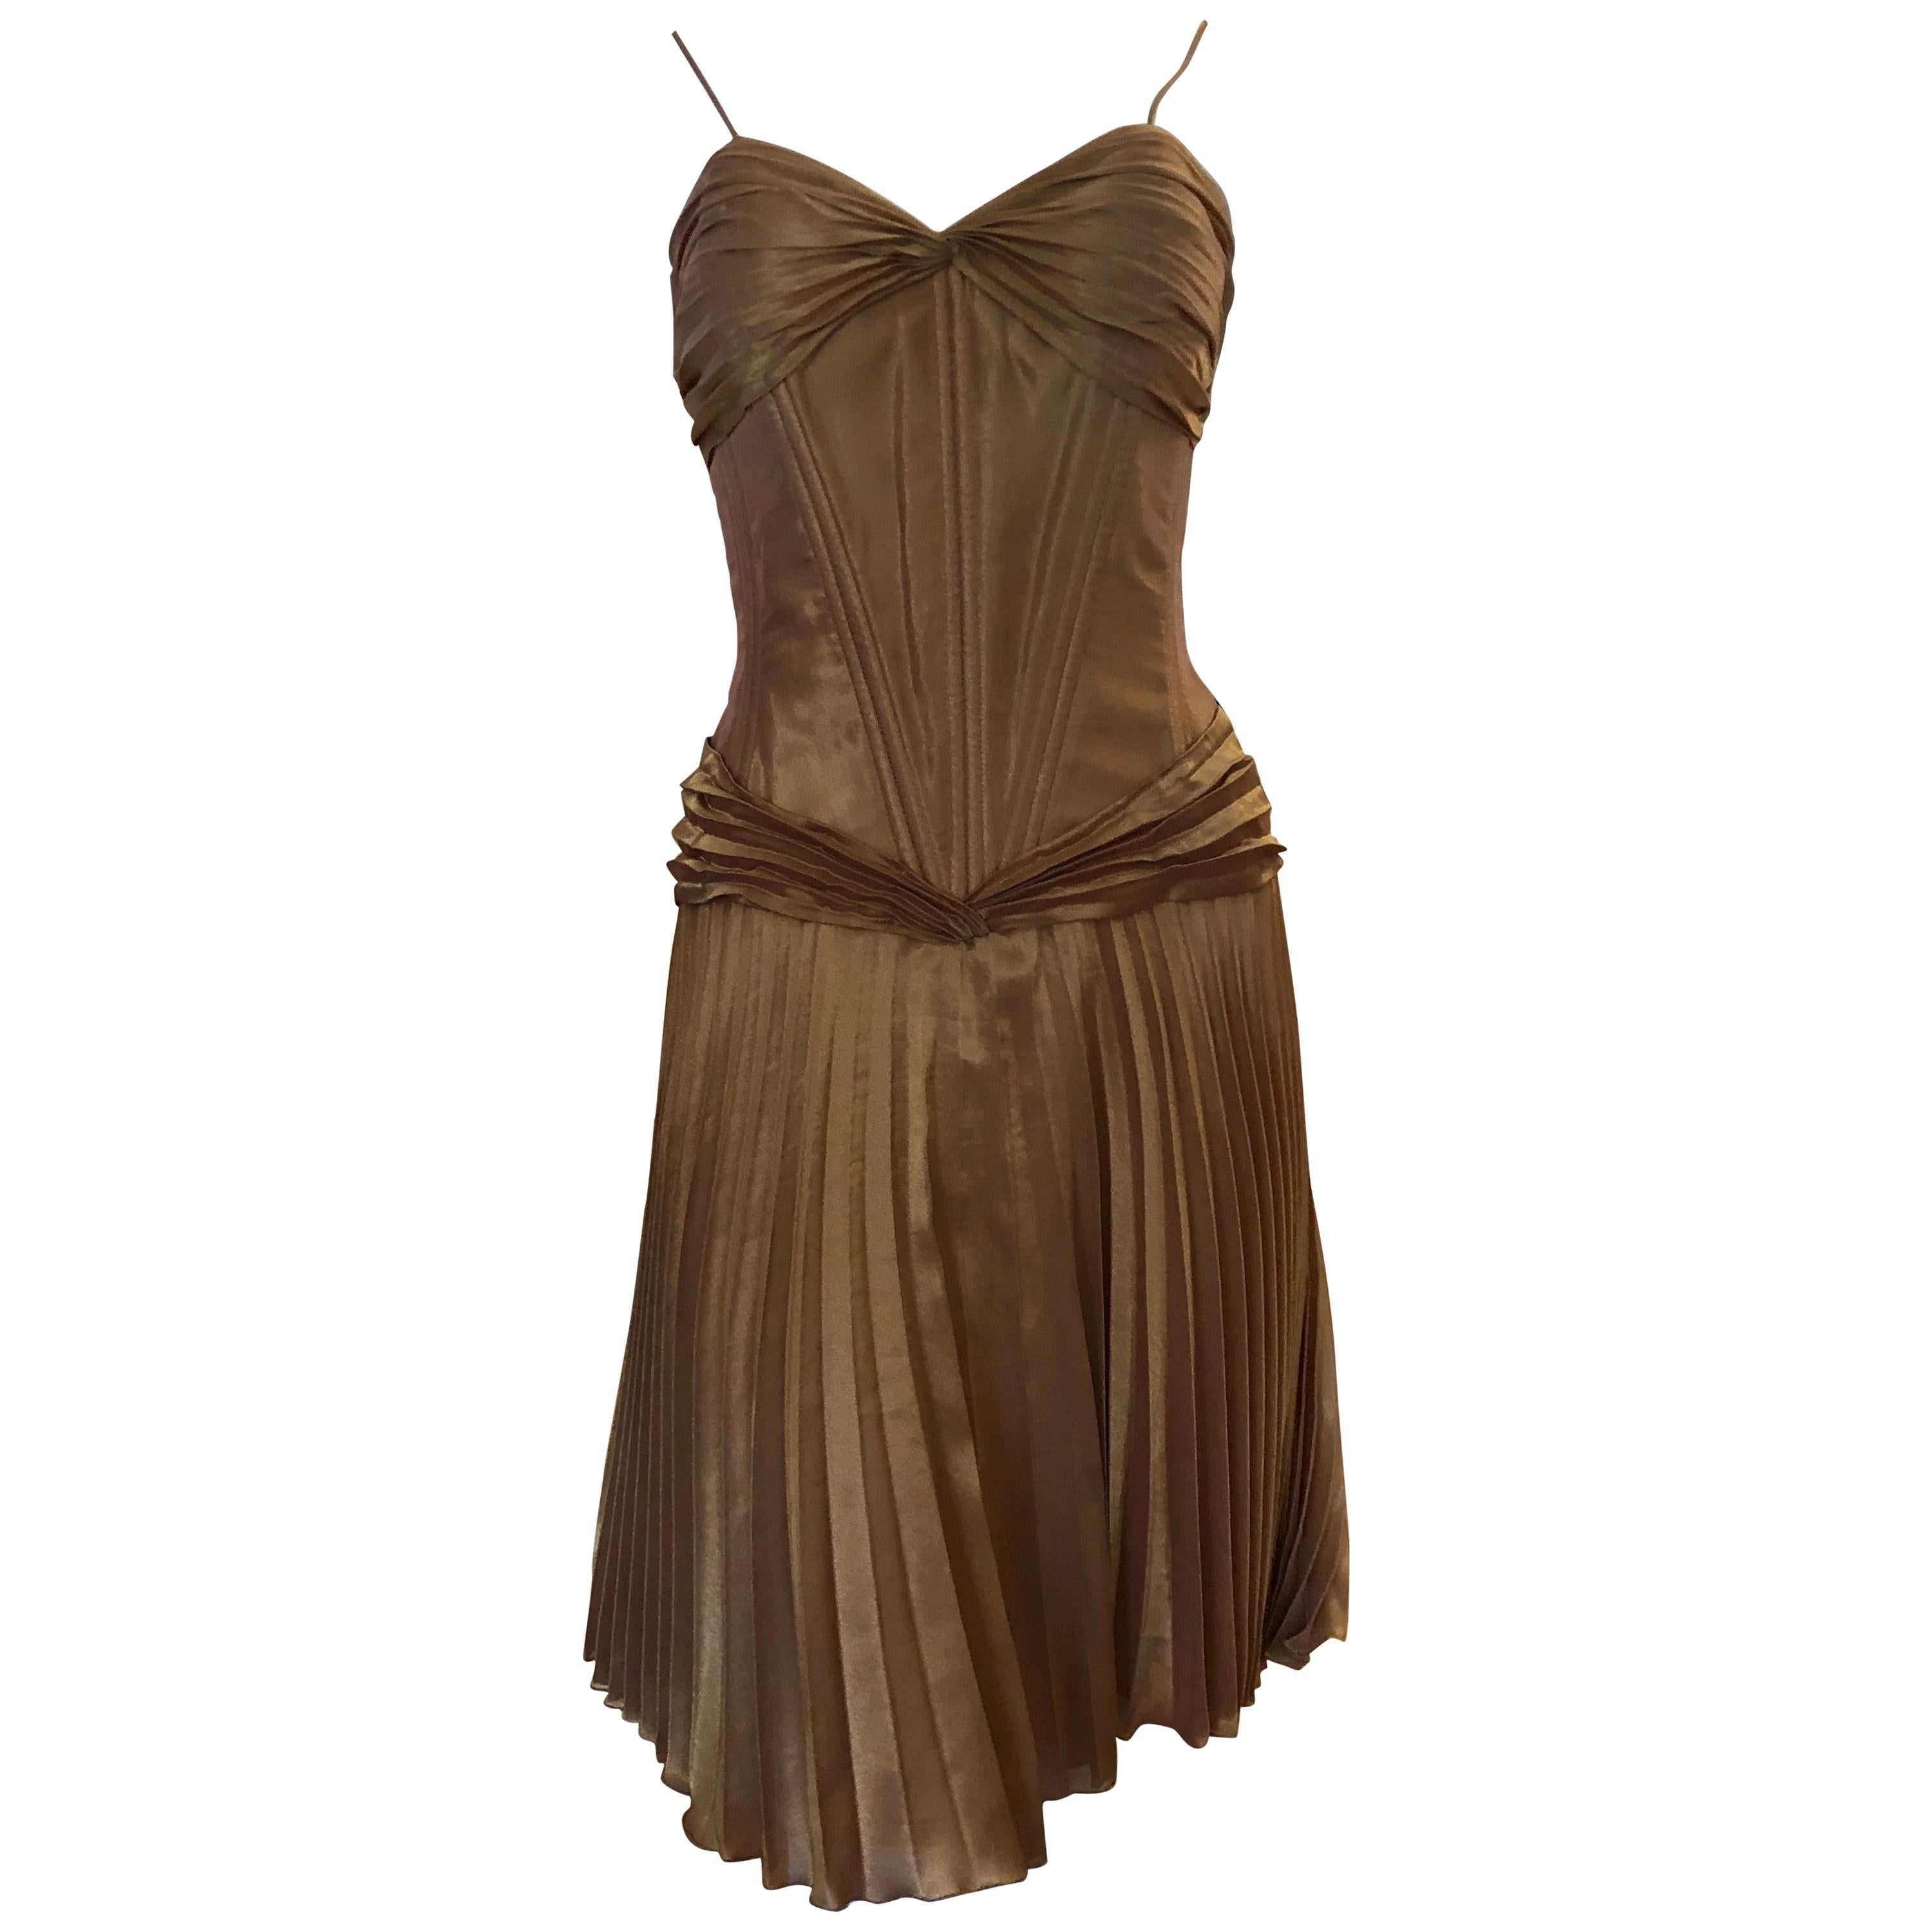 Superb 1980s Vicky Tiel Couture Metallic Gold Lame Dress with Bolero (38) For Sale